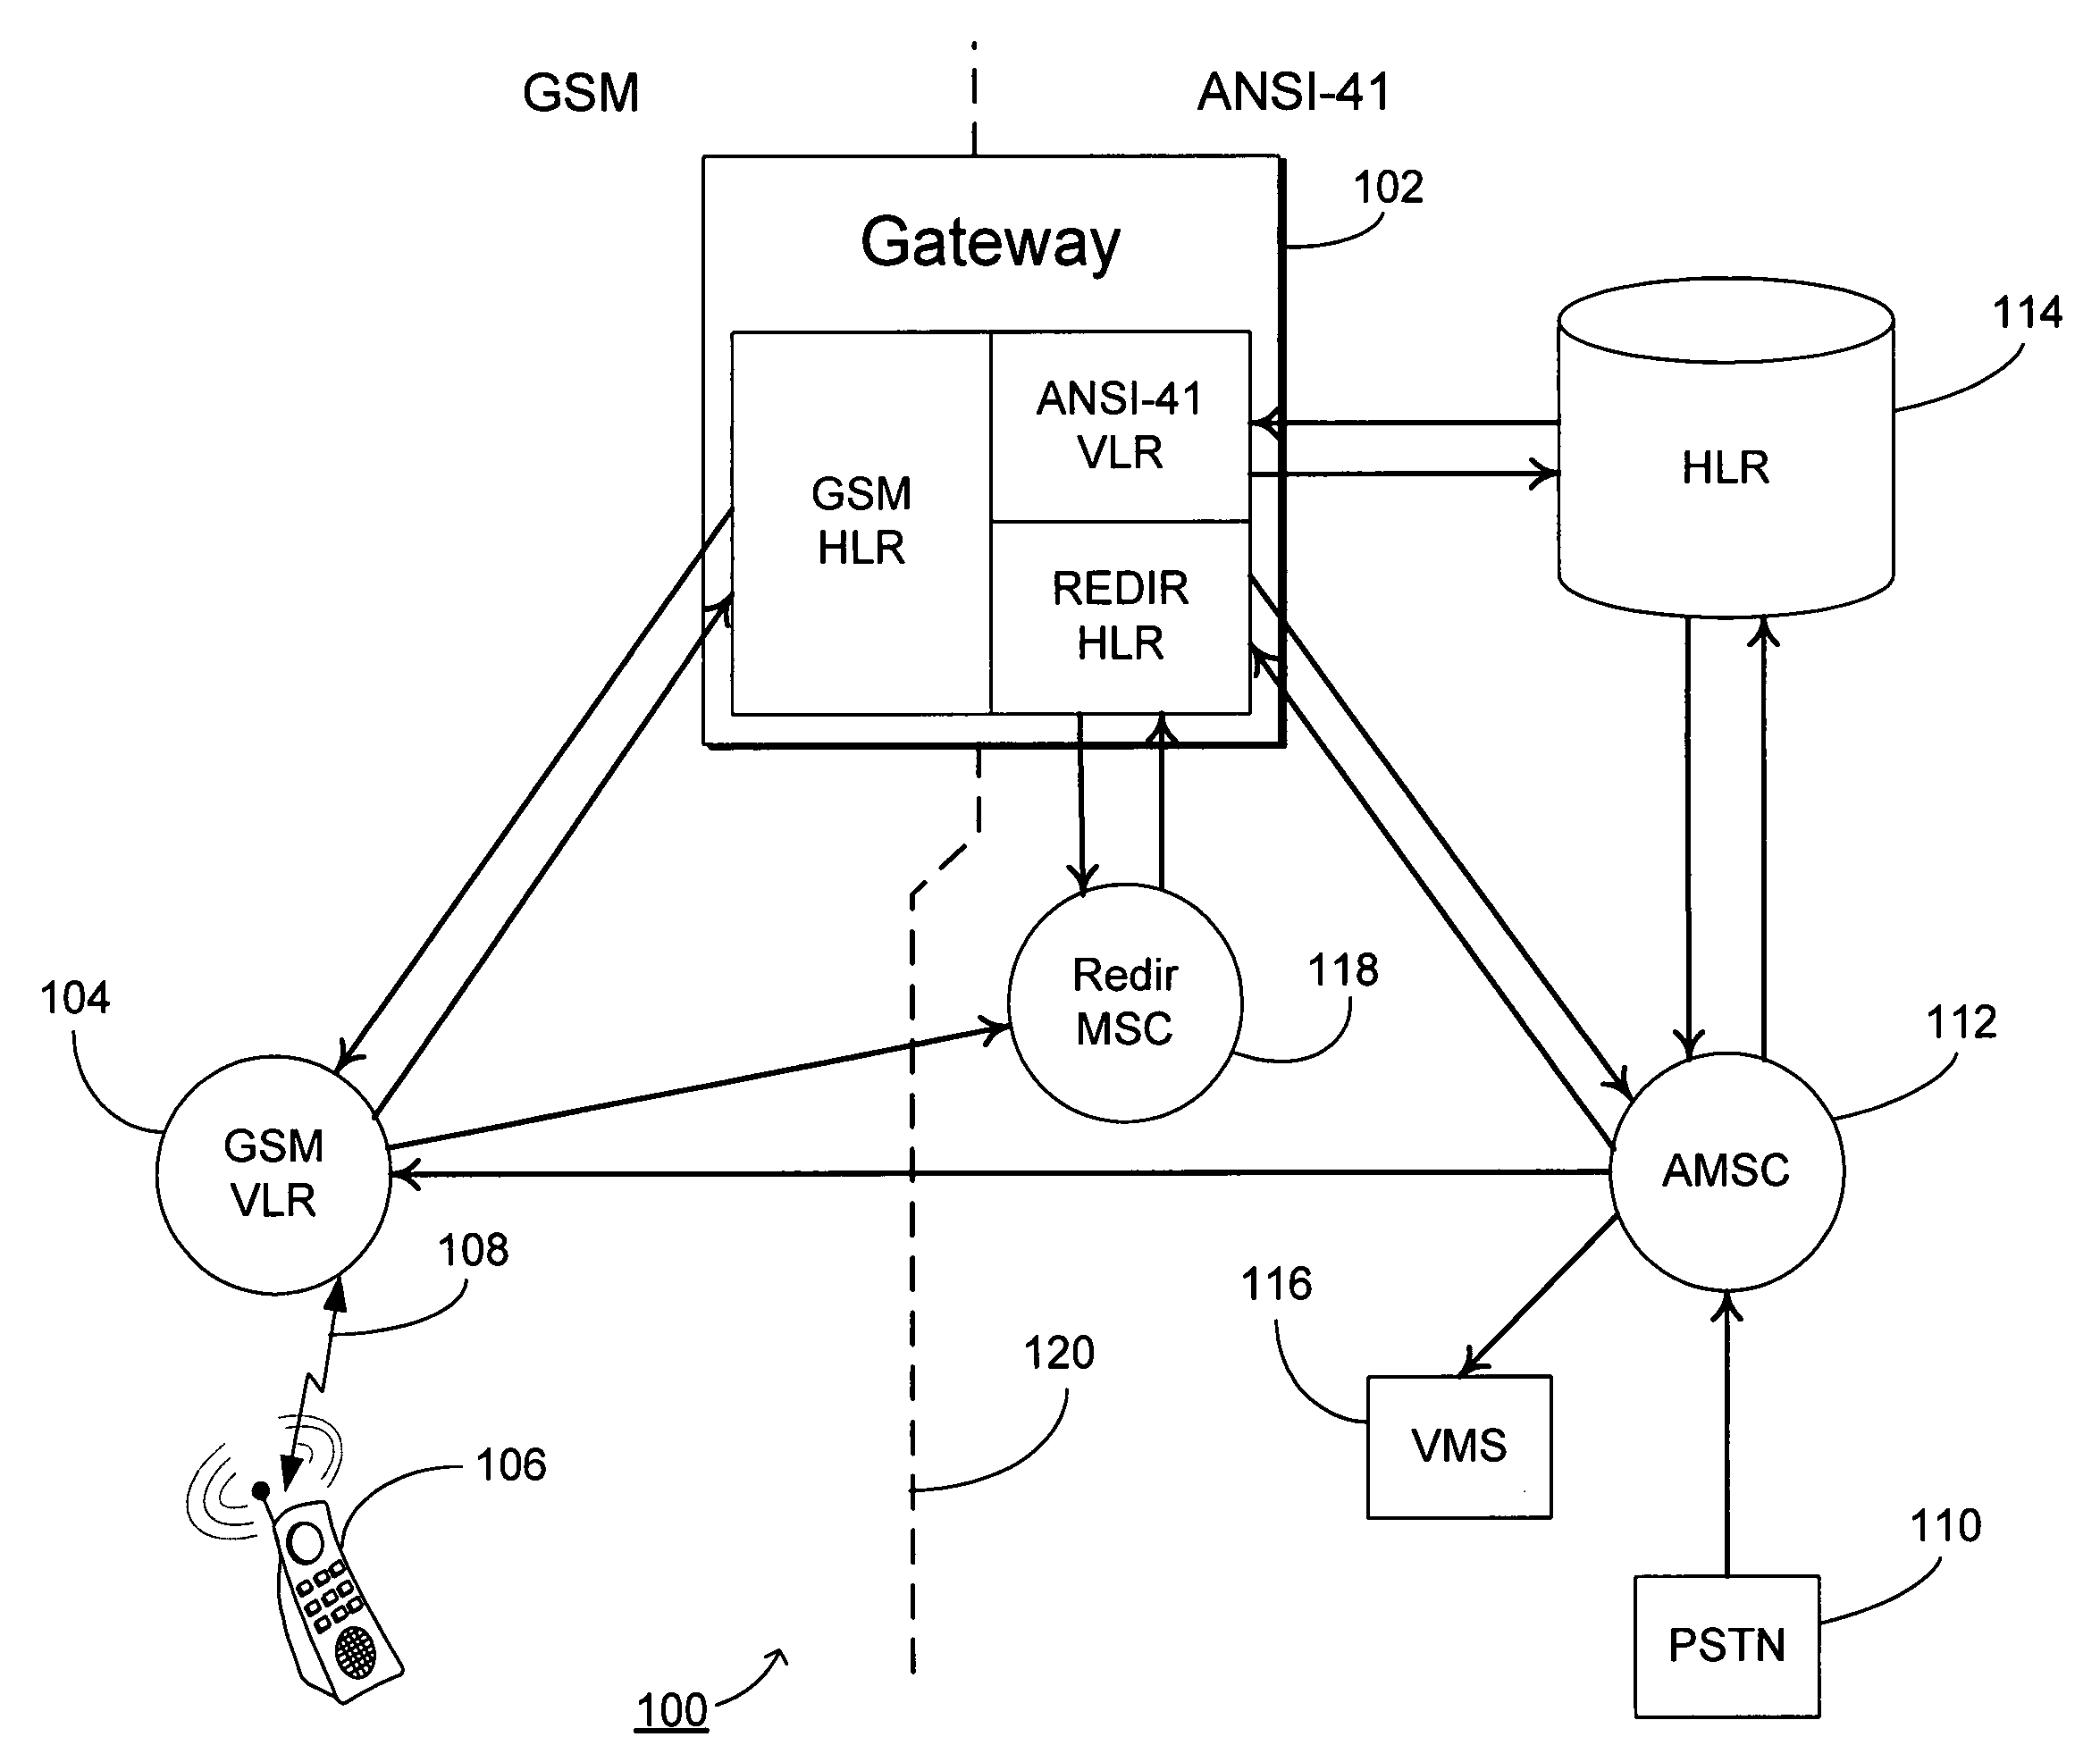 Method of and apparatus for use in forwarding calls intended for roaming subscriber units